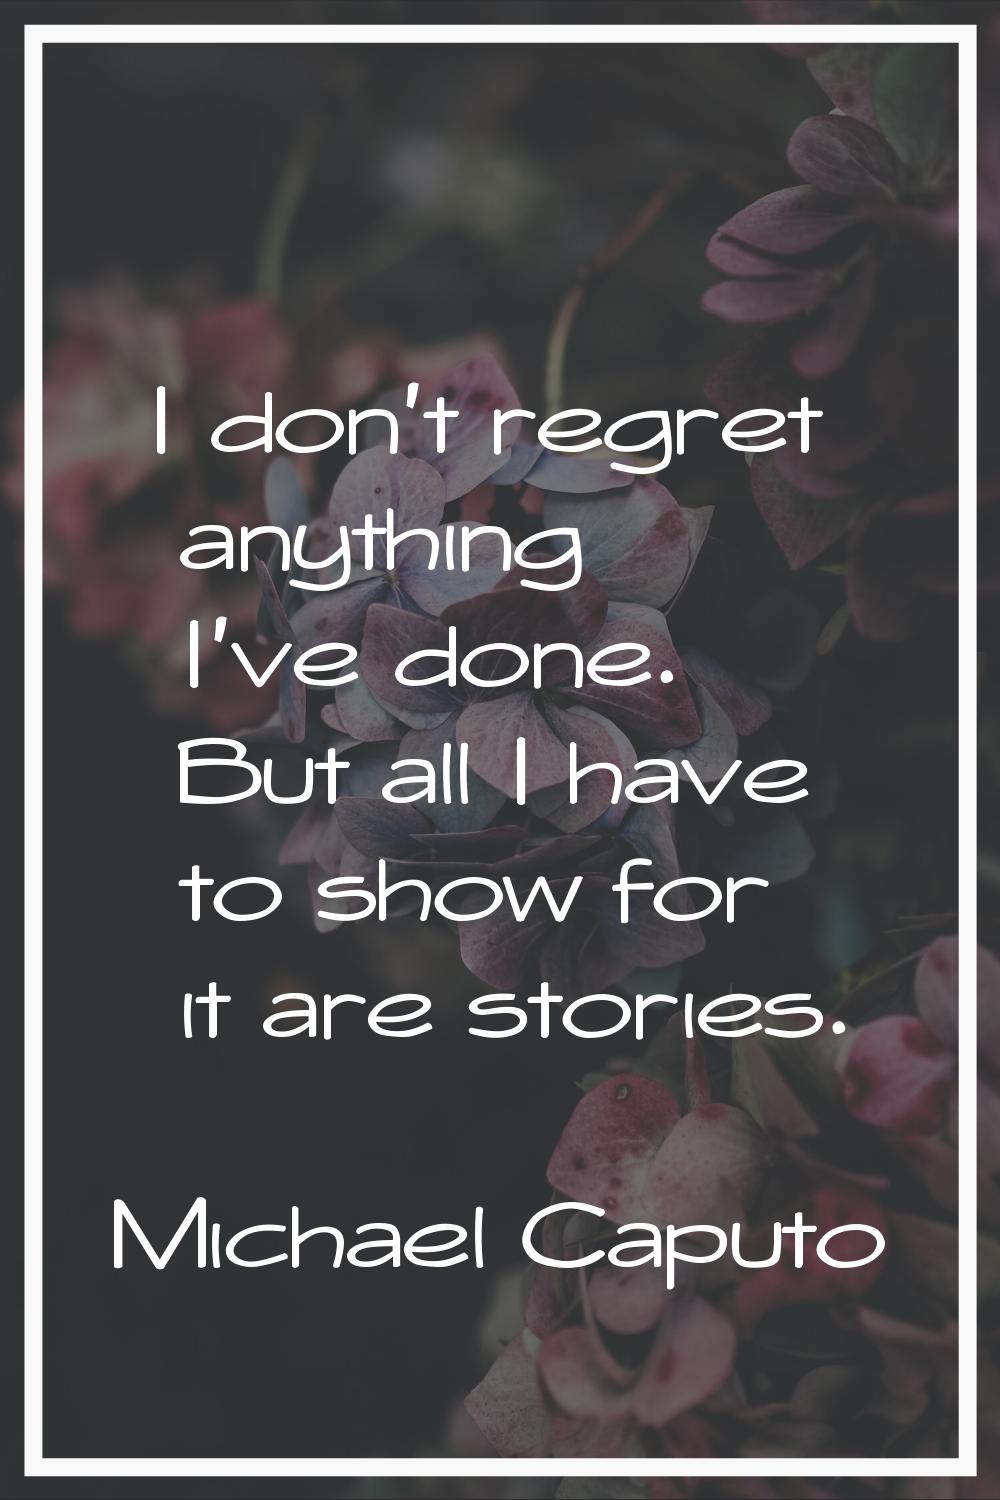 I don't regret anything I've done. But all I have to show for it are stories.